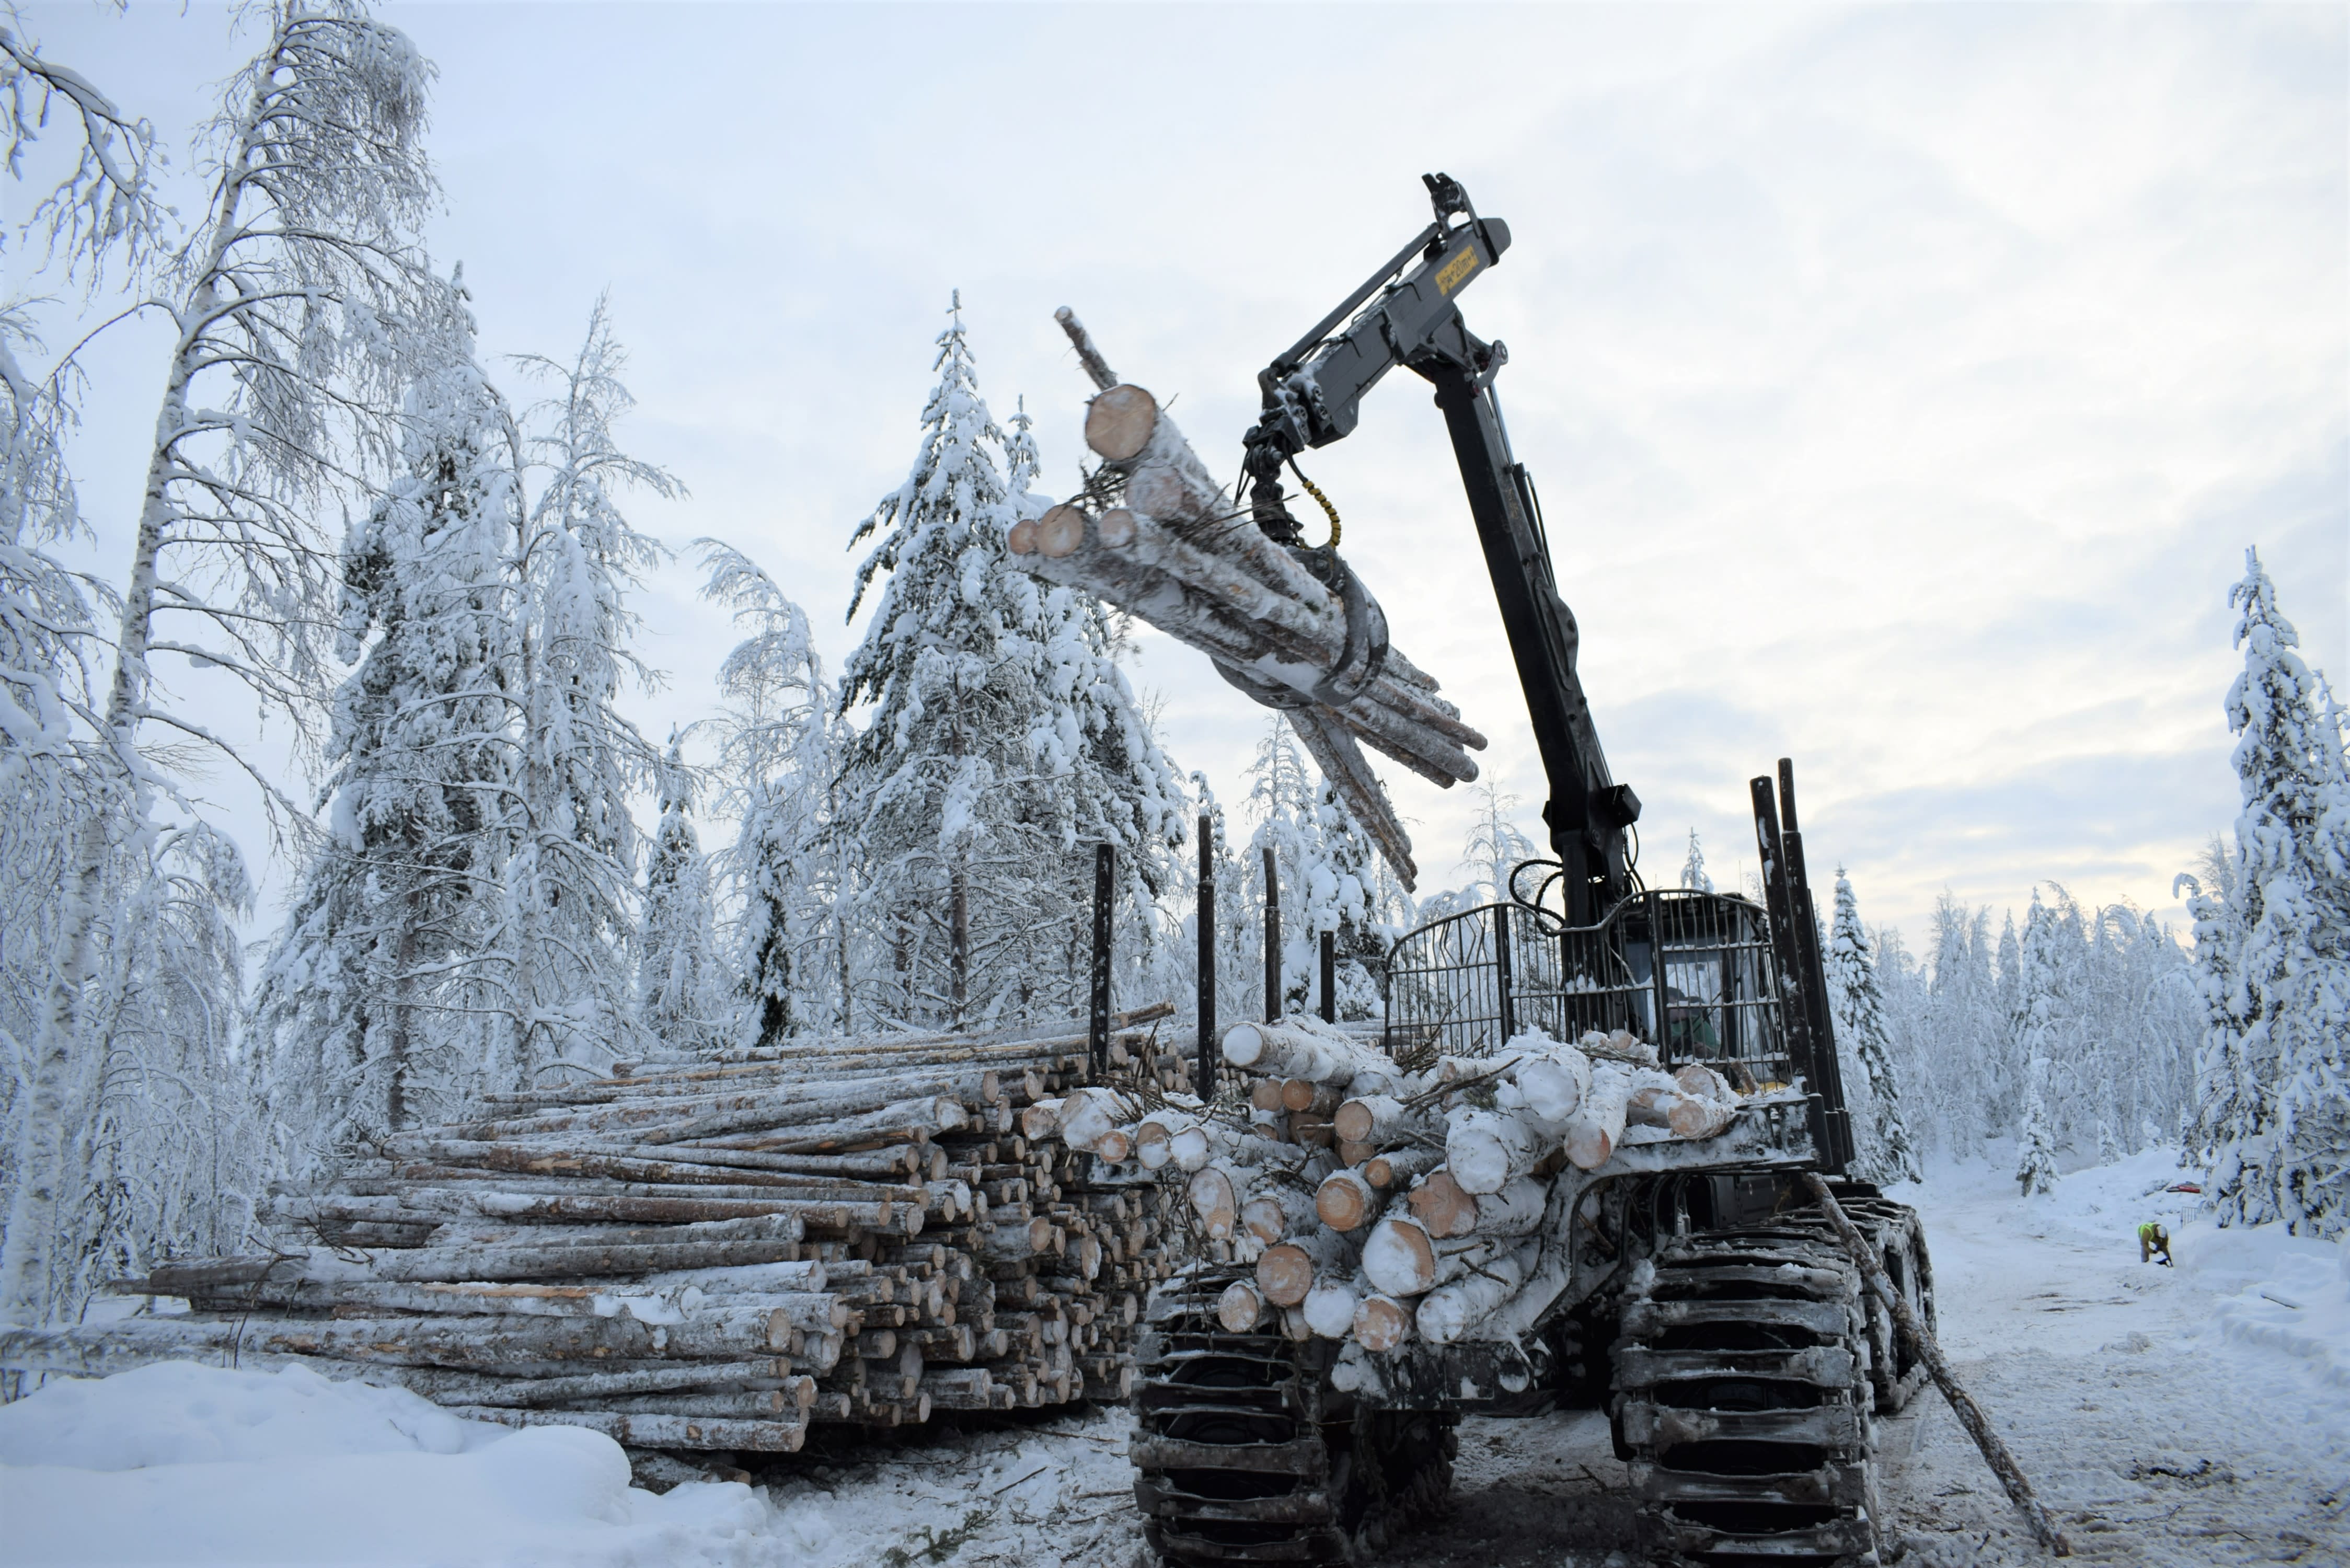 Forest protection activists are returning to the logging area in Lapland